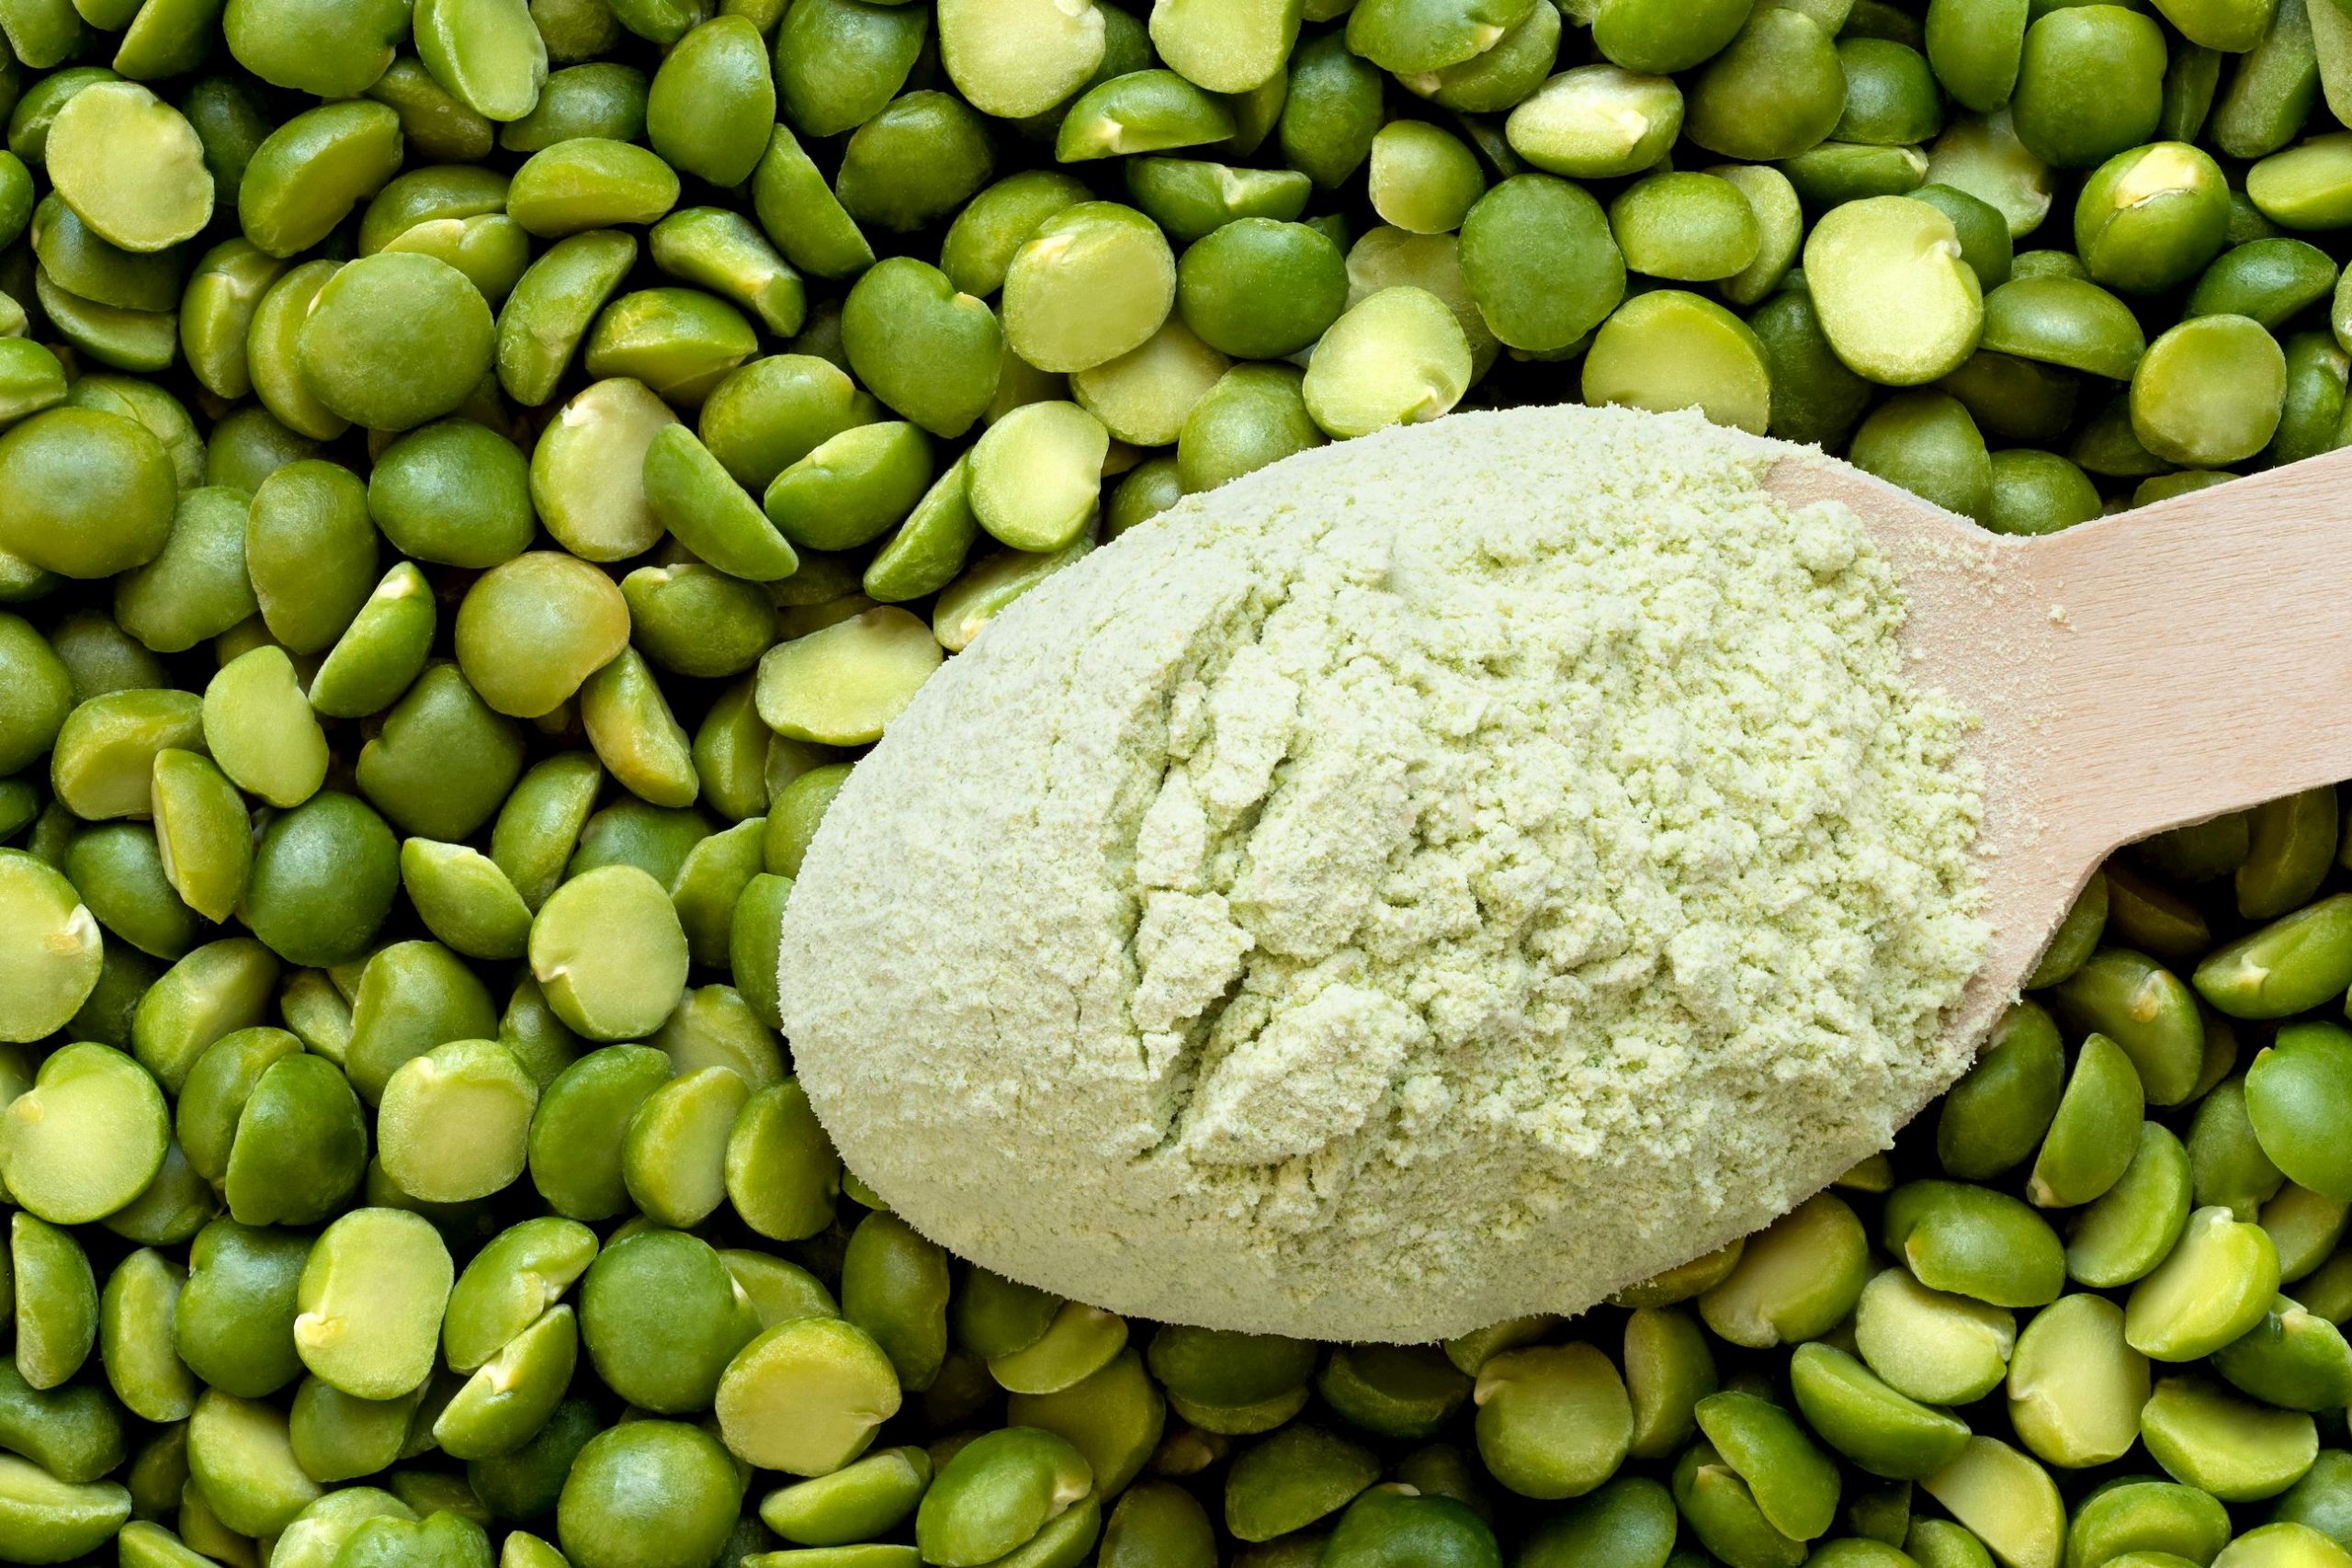 Future Prospects of the Pea Protein Market